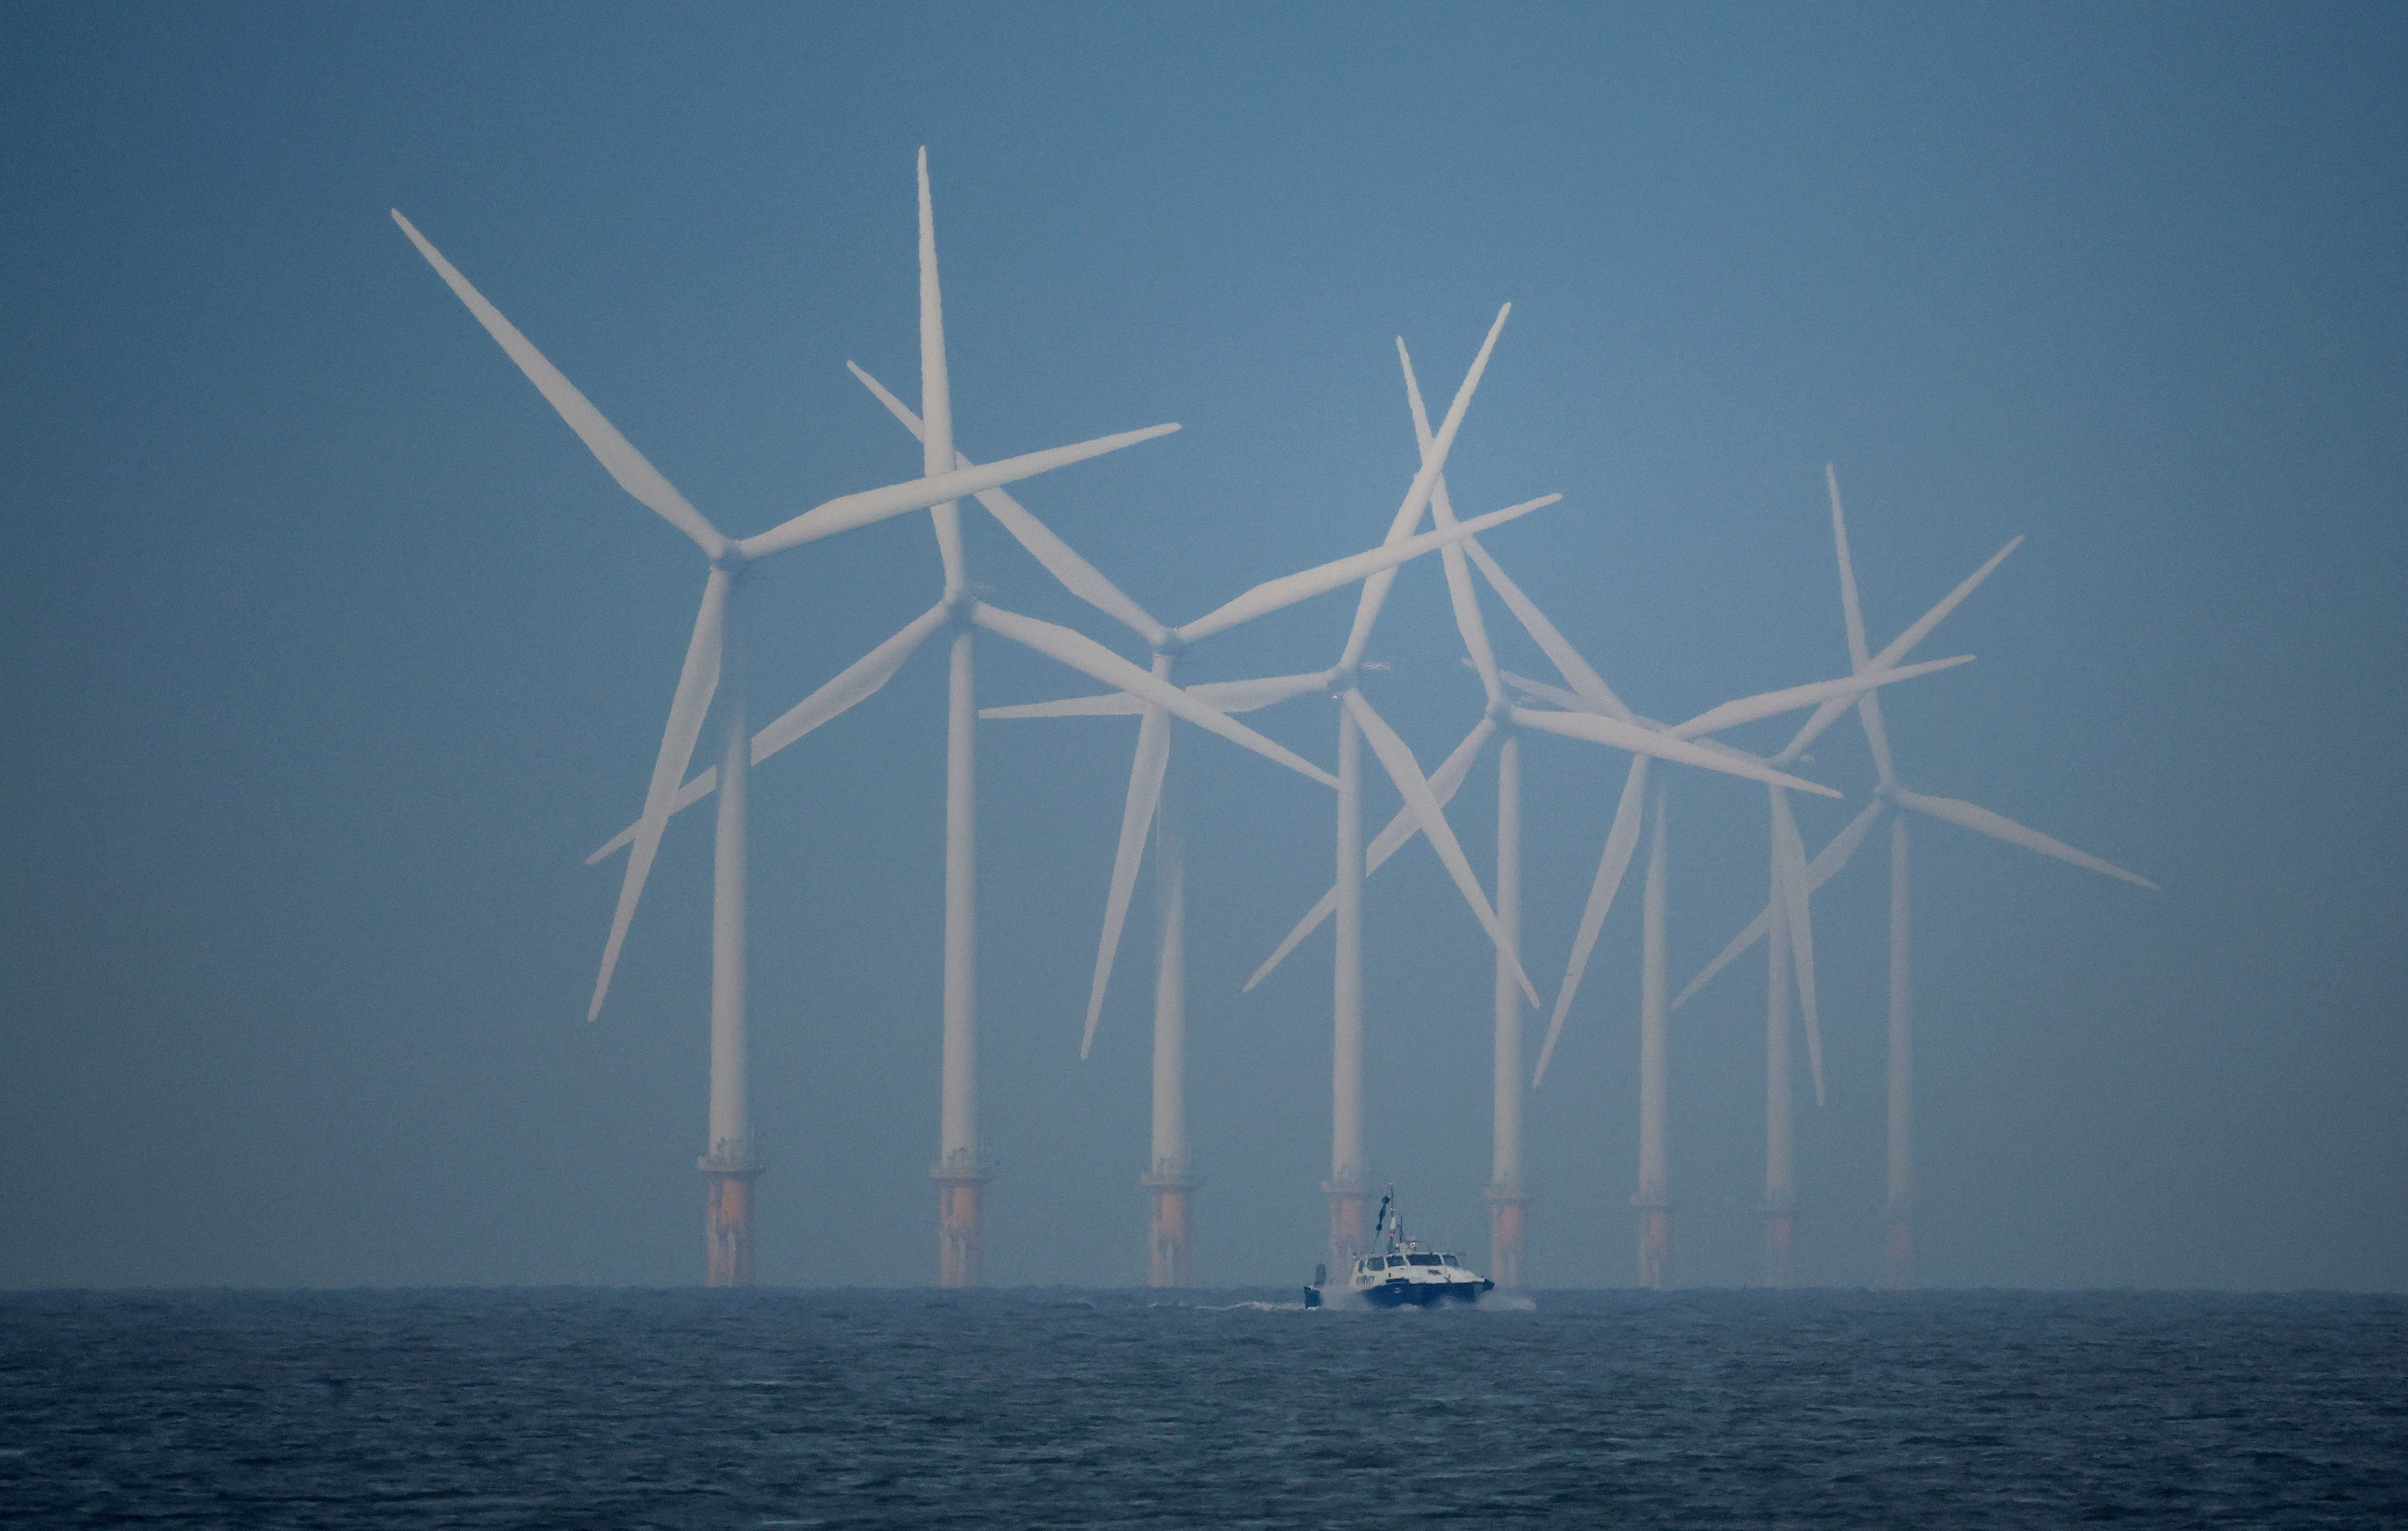 A survey vessel sails past wind turbines at the Burbo Bank offshore wind farm near New Brighton